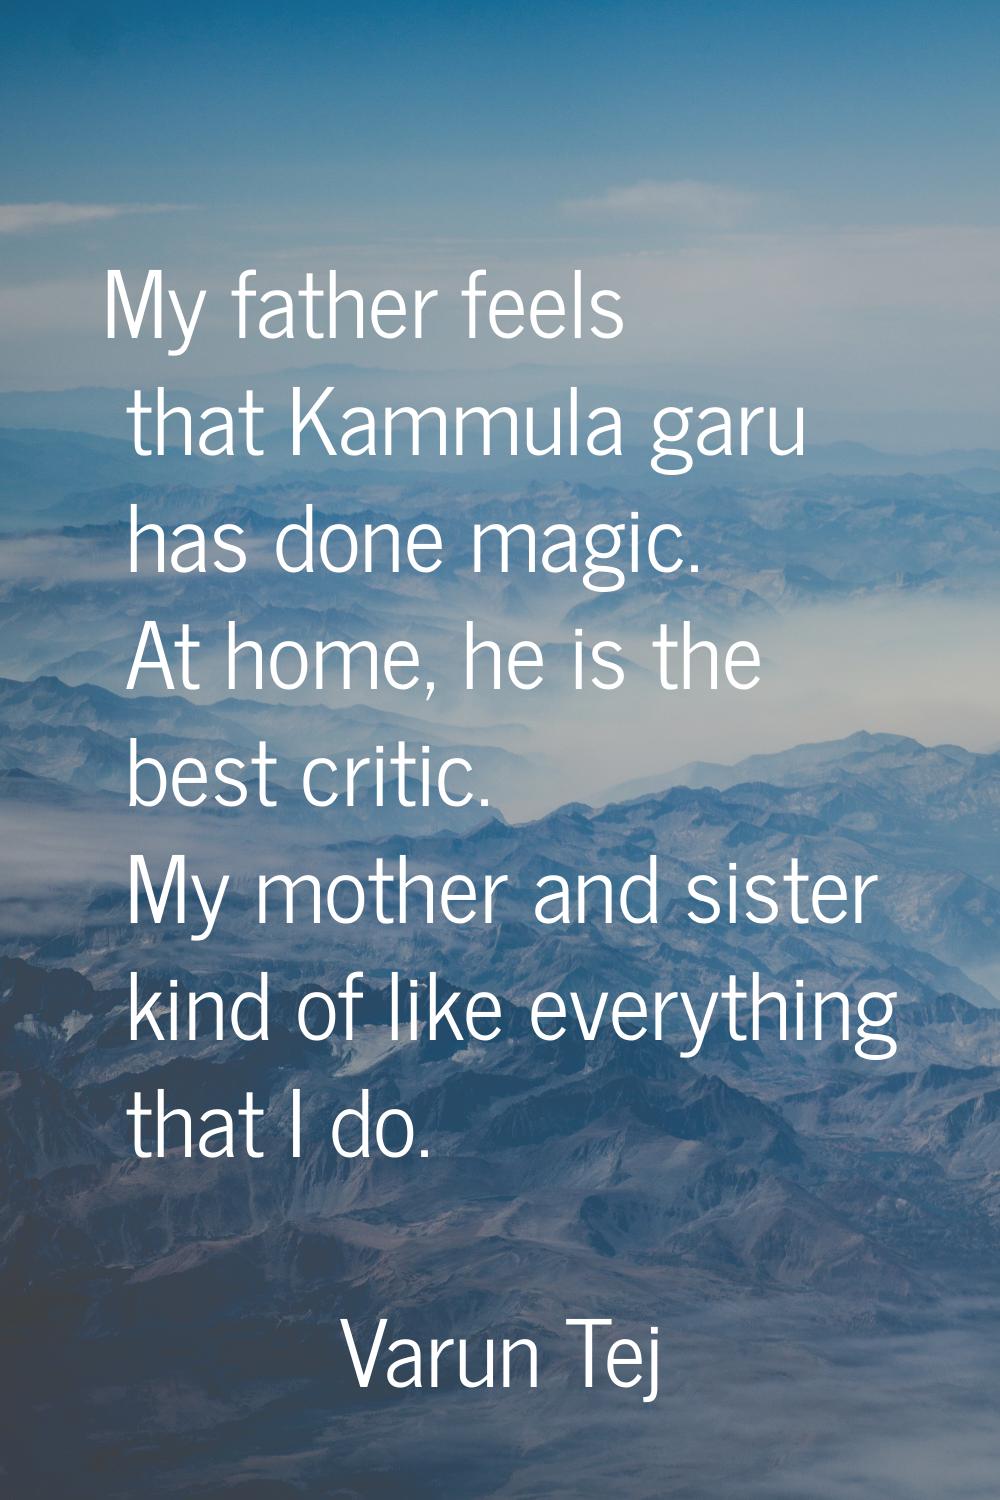 My father feels that Kammula garu has done magic. At home, he is the best critic. My mother and sis